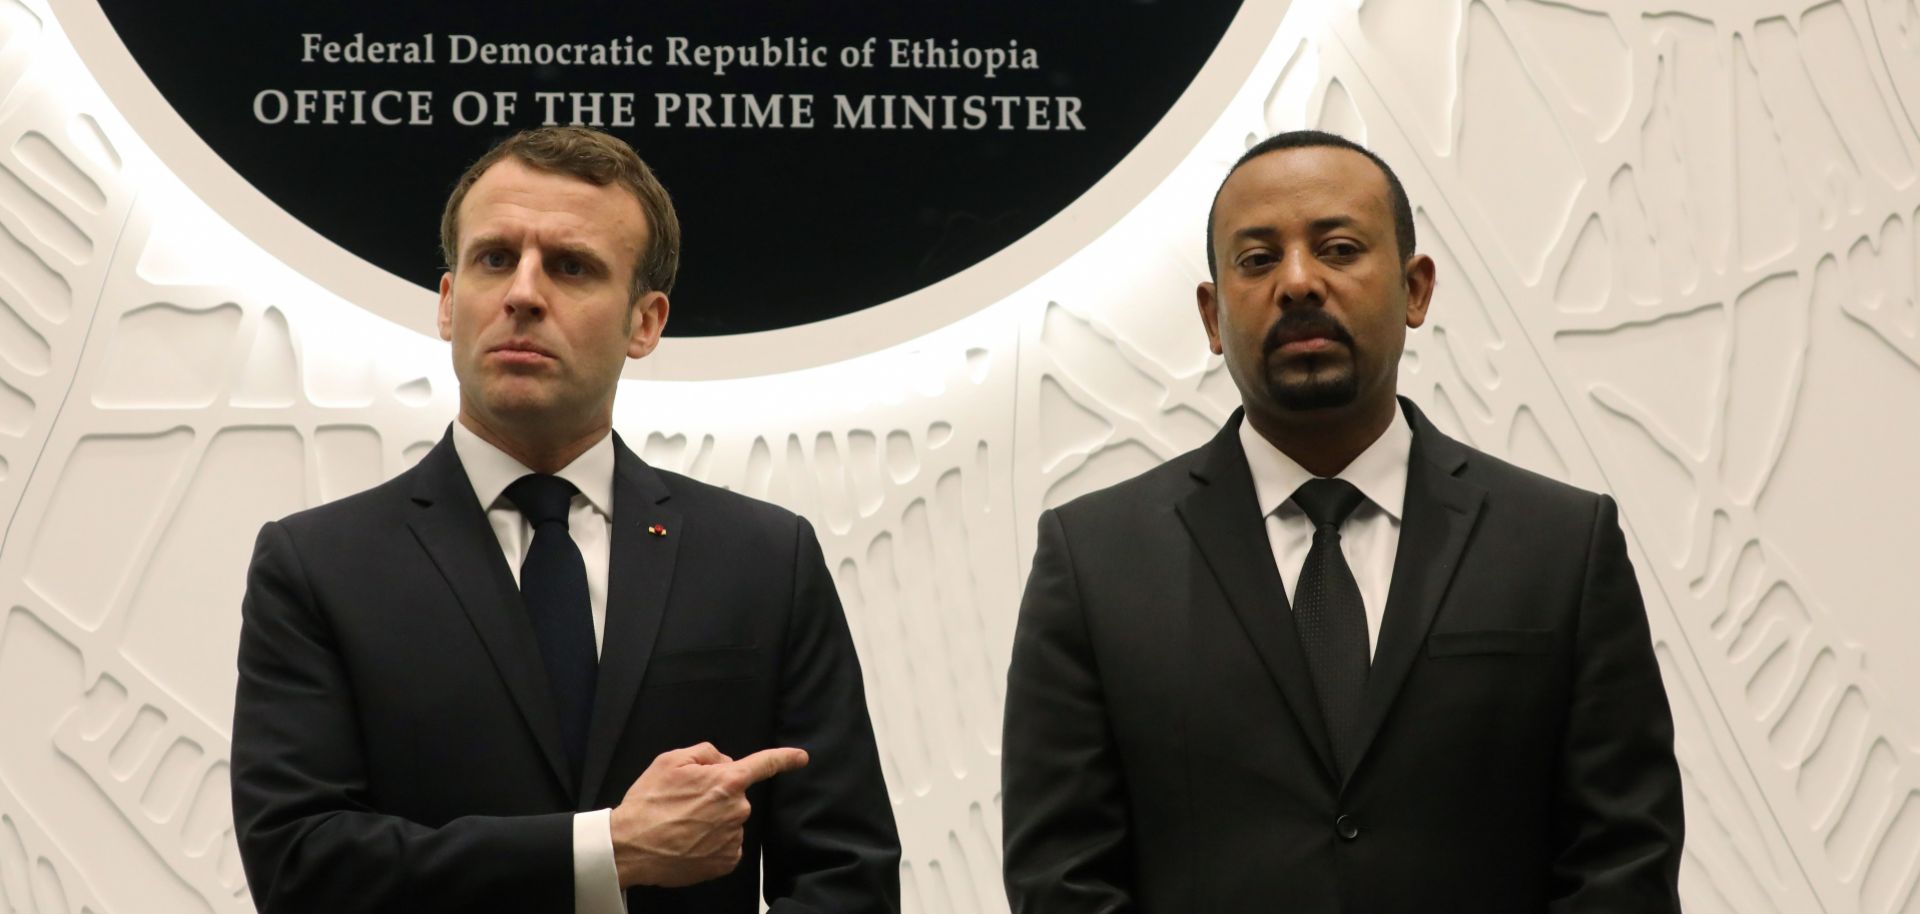 Ethiopian Prime Minister Abiy Ahmed (R) speaks with French President Emmanuel Macron after signing agreements during a meeting on March 12, 2019, in Addis Ababa.